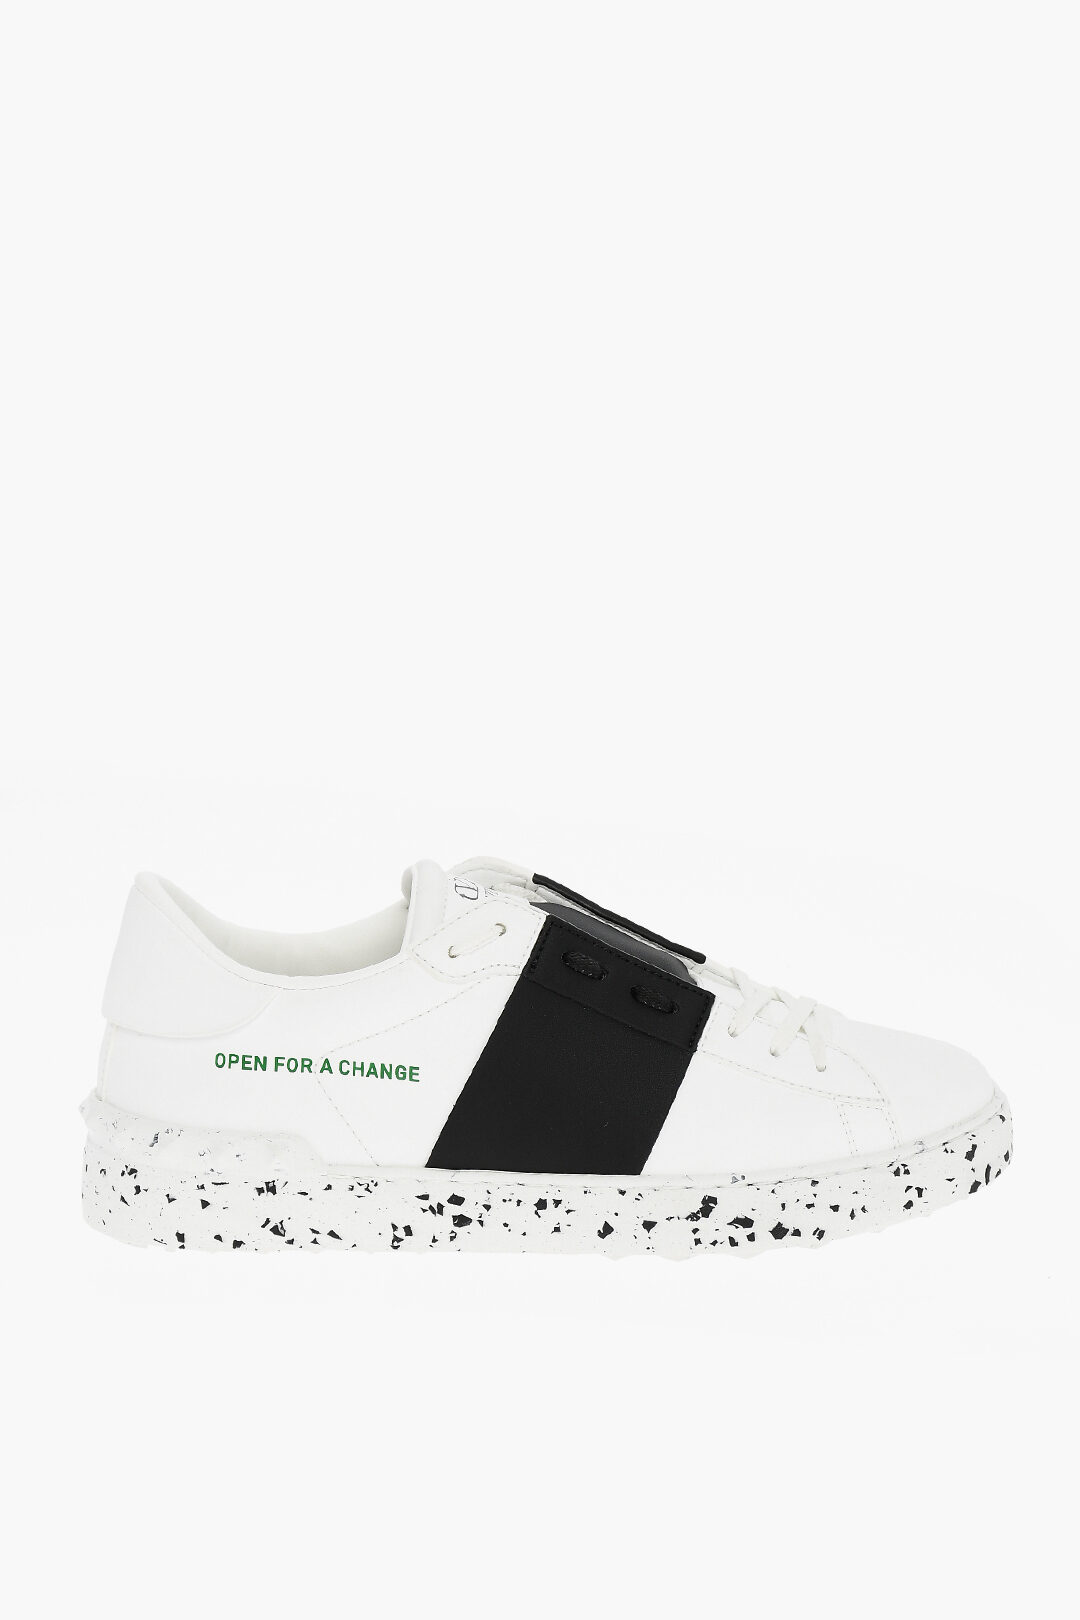 Repressalier champignon Vellykket Valentino Contrasting Band Low-Top Sneakers men - Glamood Outlet